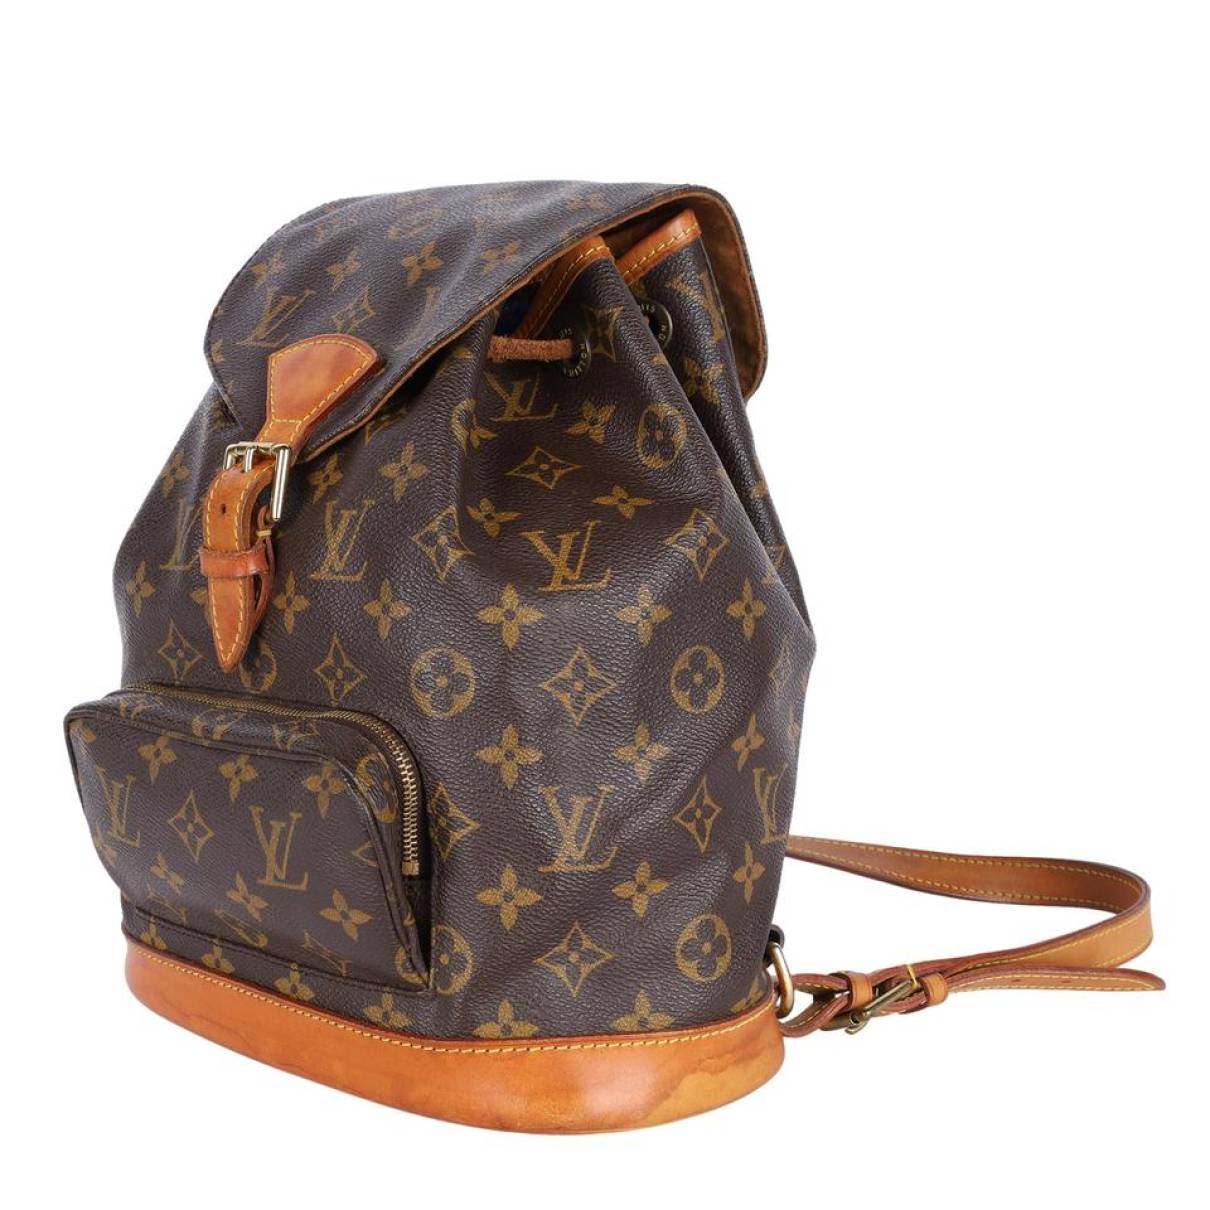 Montsouris leather backpack Louis Vuitton Brown in Leather - 31147057